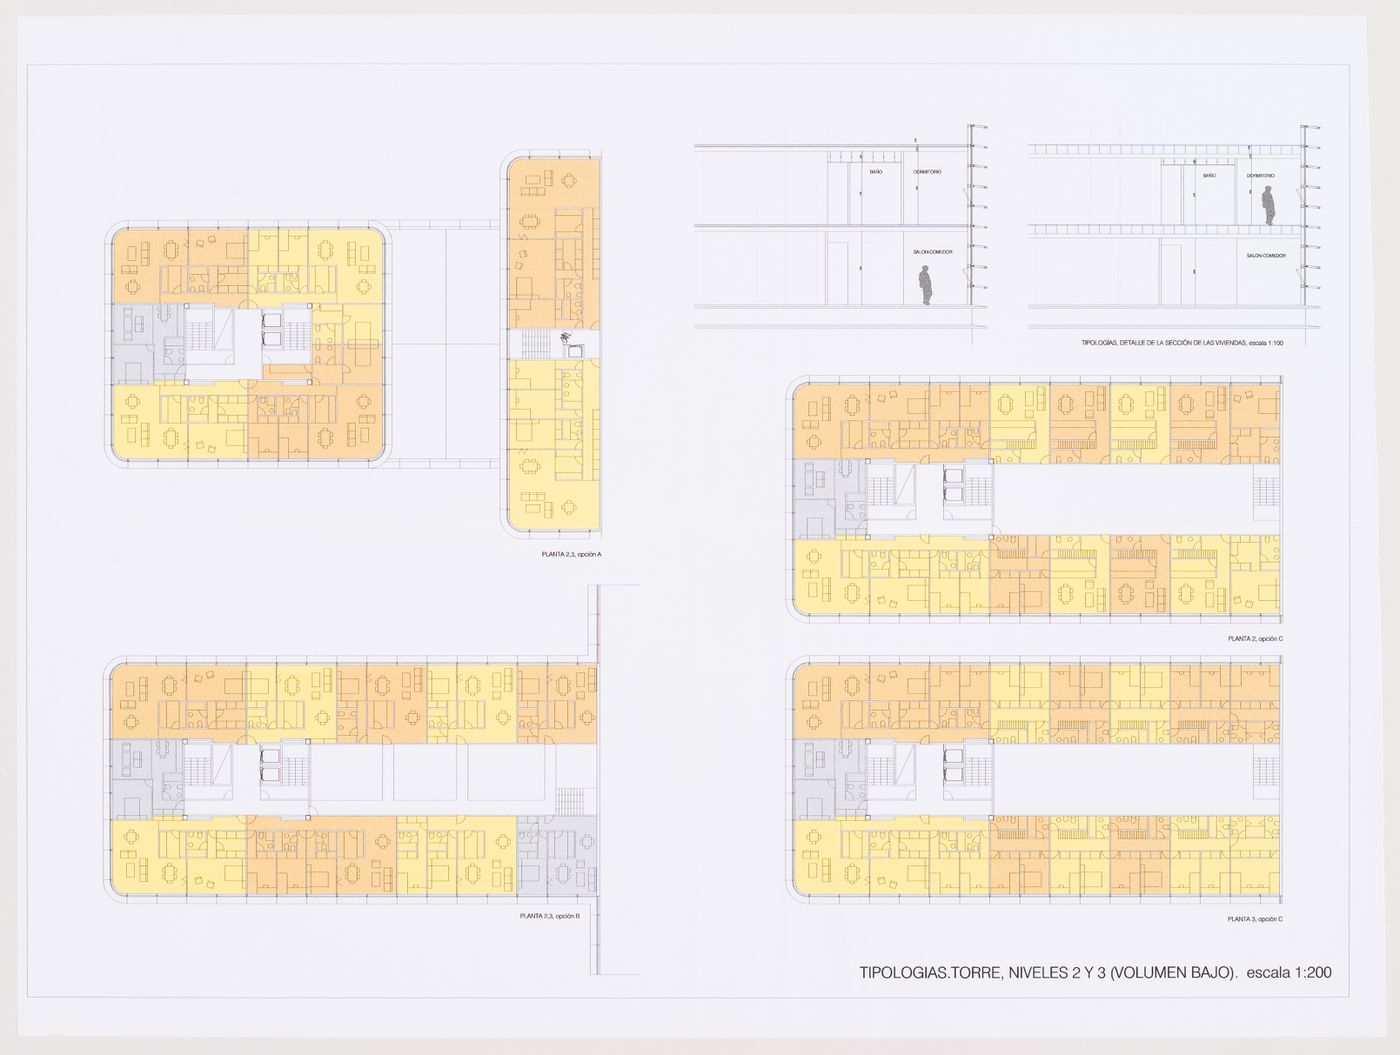 Second and third floor plans, Plaza y torre Woermann, Las Palmas, Canary Islands